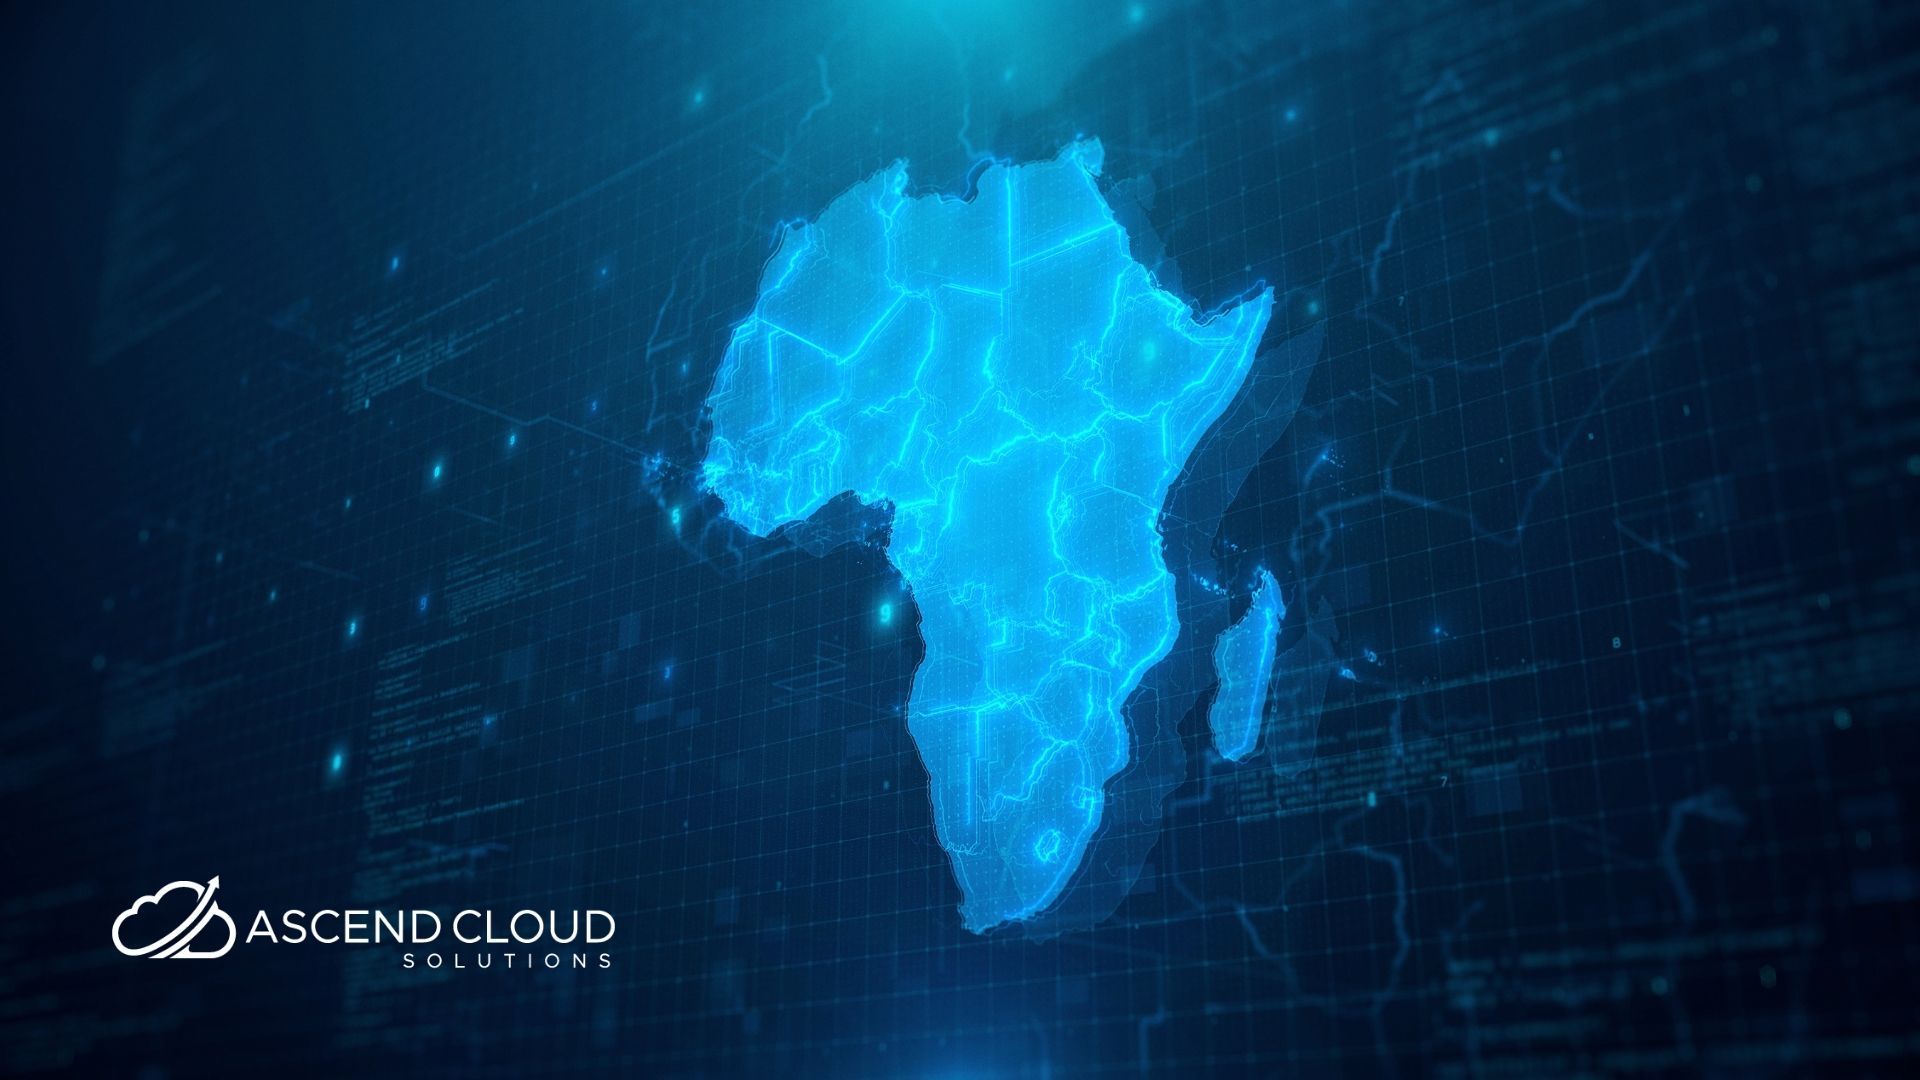 Africa is home to 1.2 billion people but only a tiny percentage of the world's data centres. Learn more about its digital plumbing – and how we might fix it.